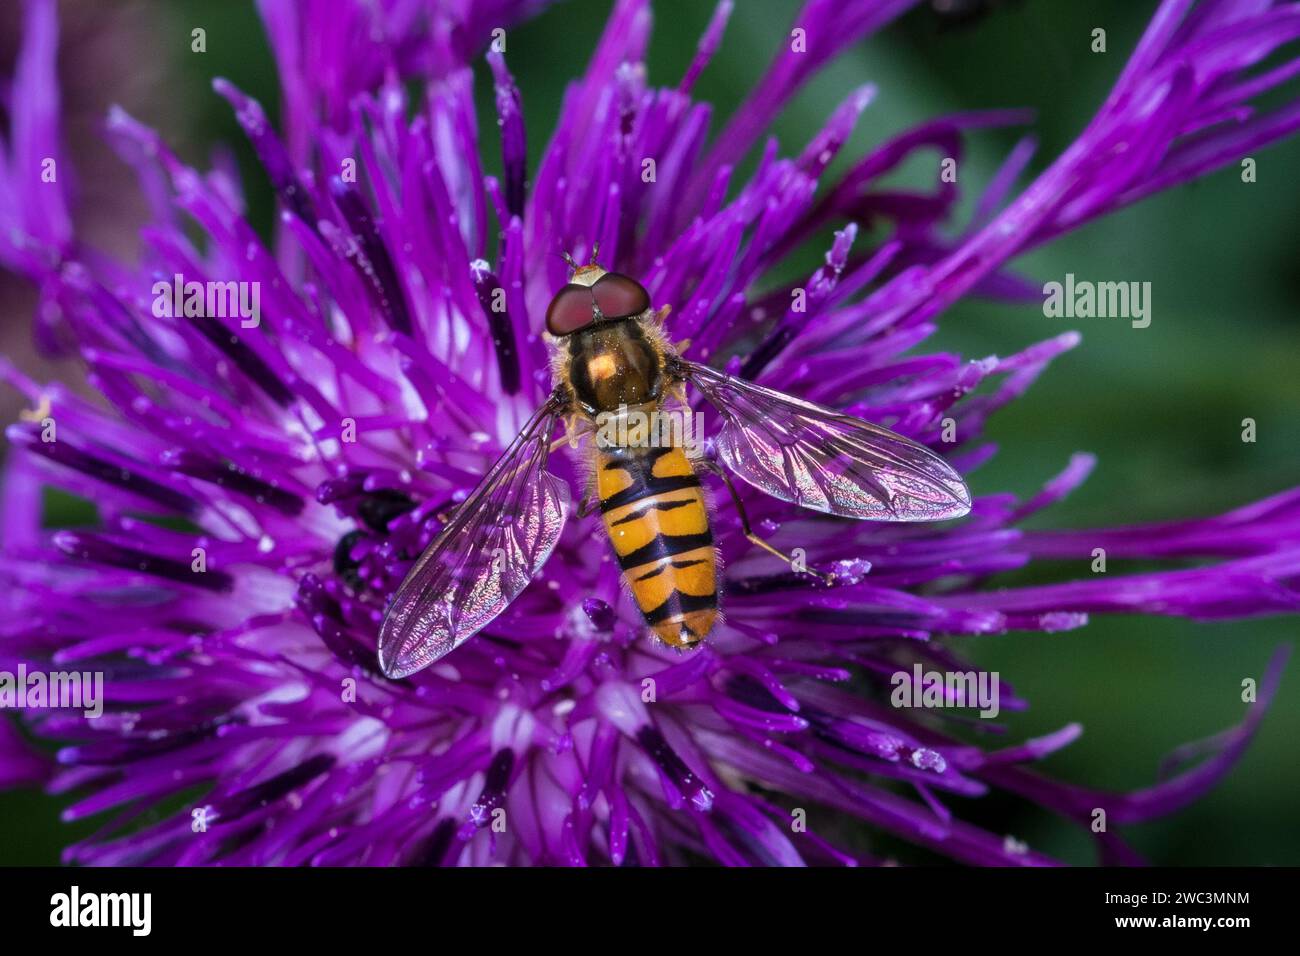 A marmalade hoverfly (Episyrphus balteatus) feeding on a purple flower. Photographed in Sunderland, North East England Stock Photo